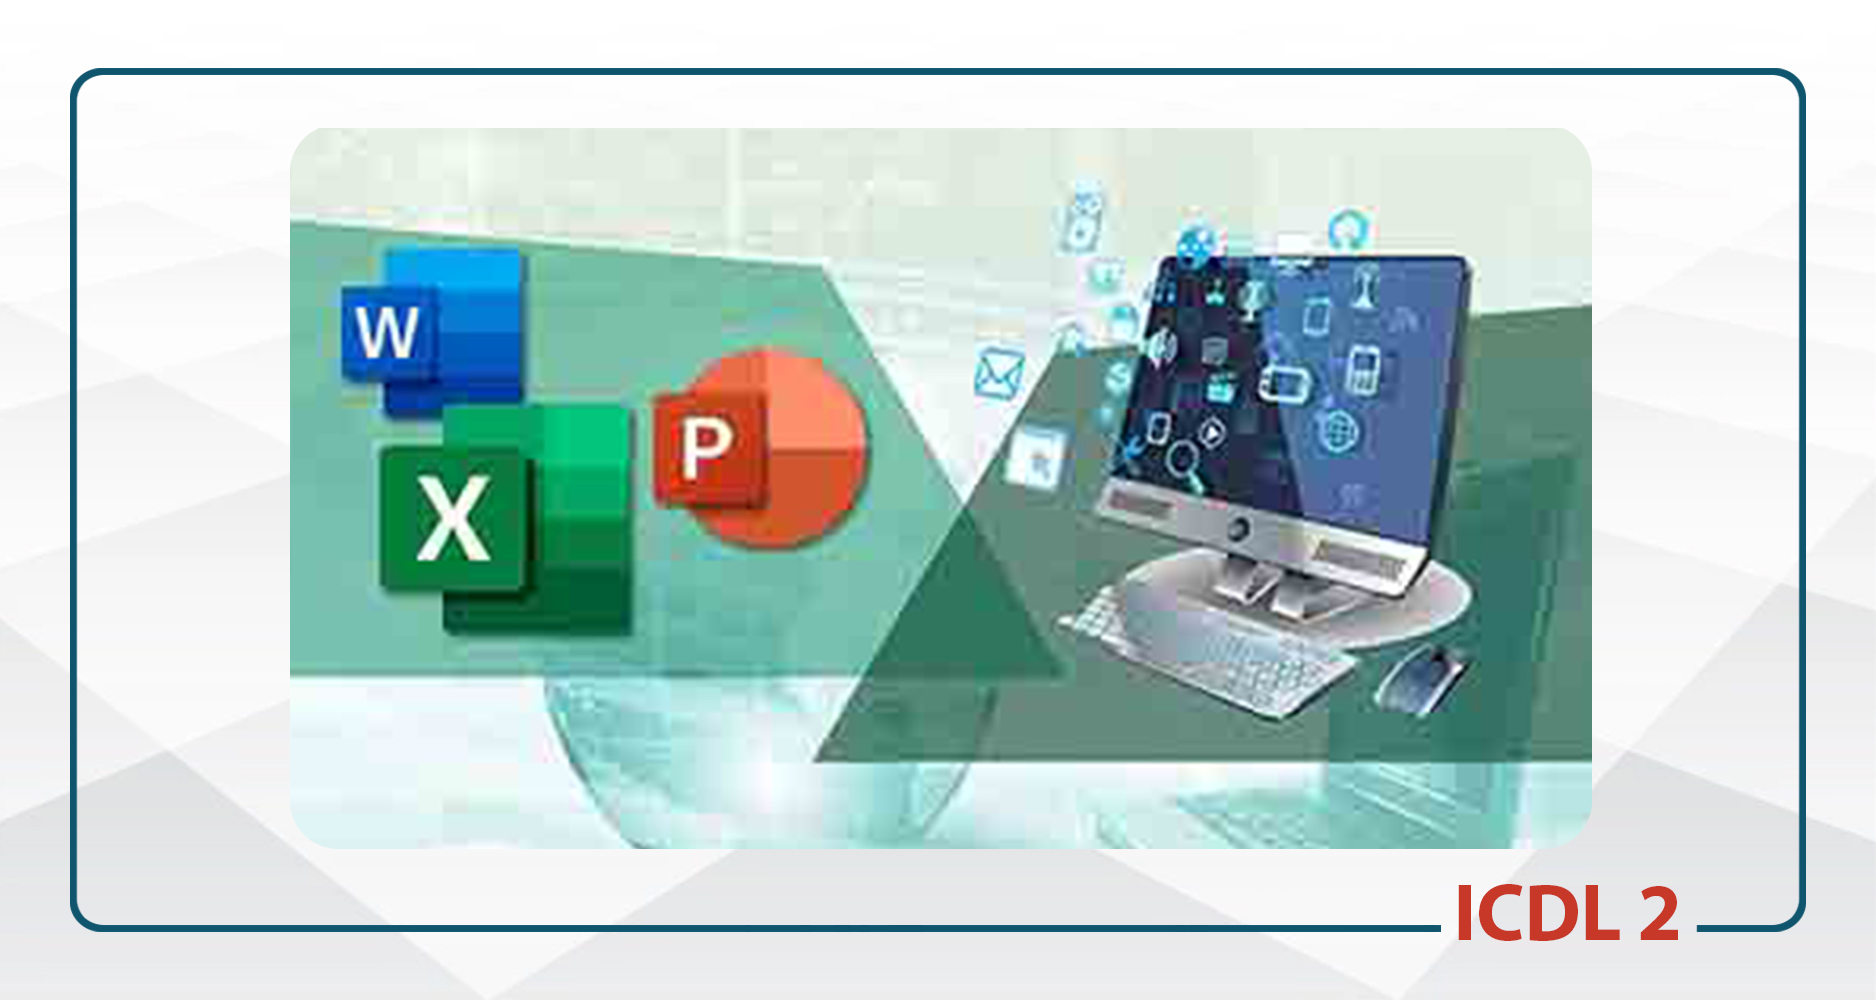 (ICDL٢) Word,Excel, Powerpoint,Access - يكشنبه سه شنبه 13-9*مالی